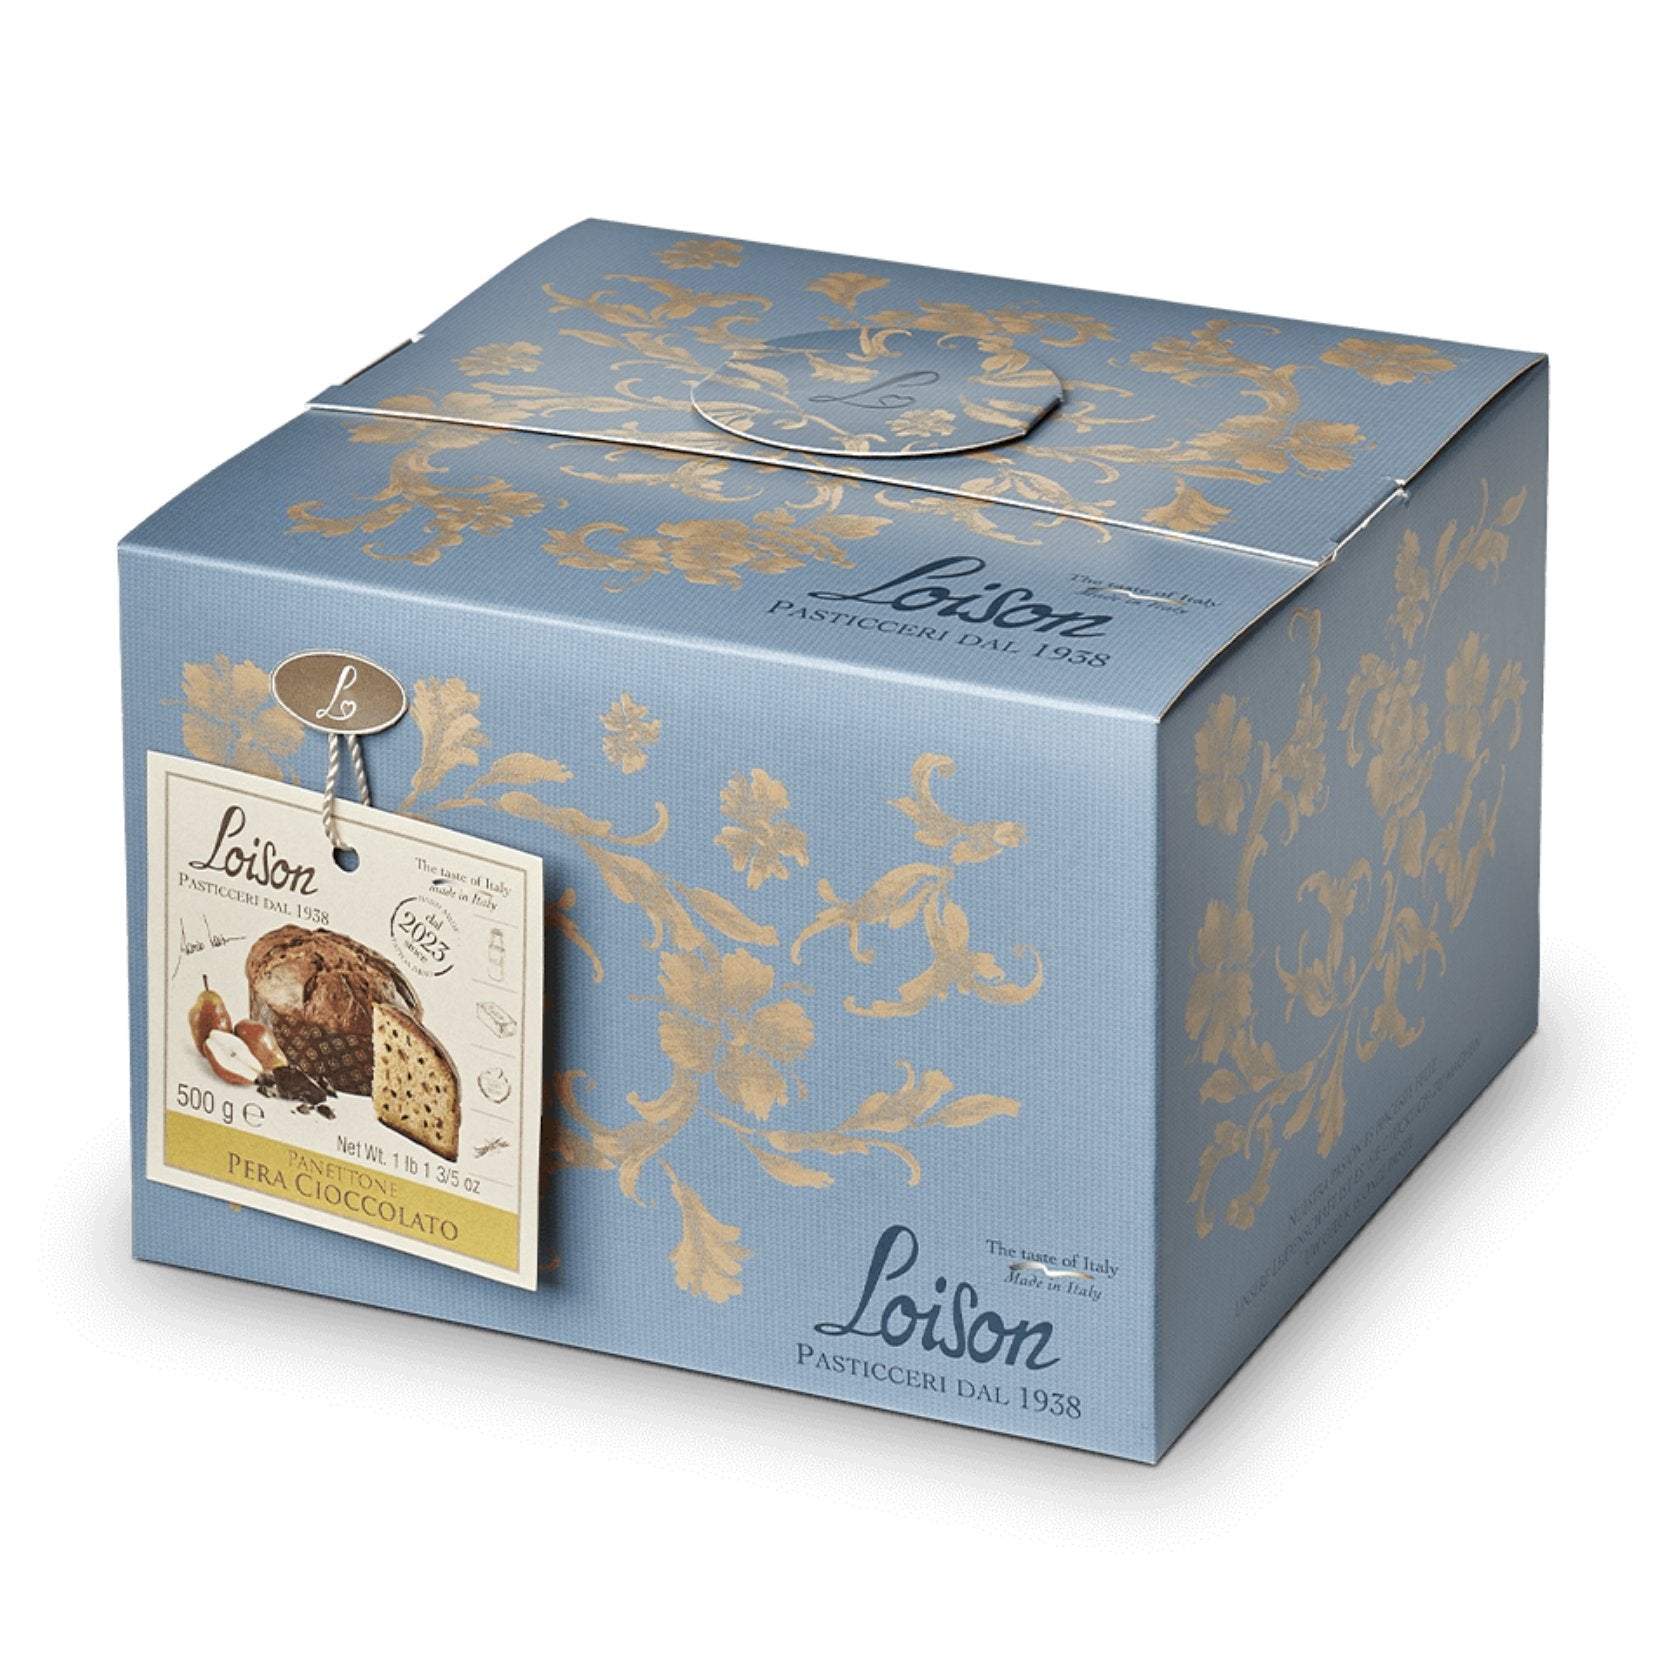 Loison Barocco Collection Pear & Chocolate Panettone 600g Feast Italy